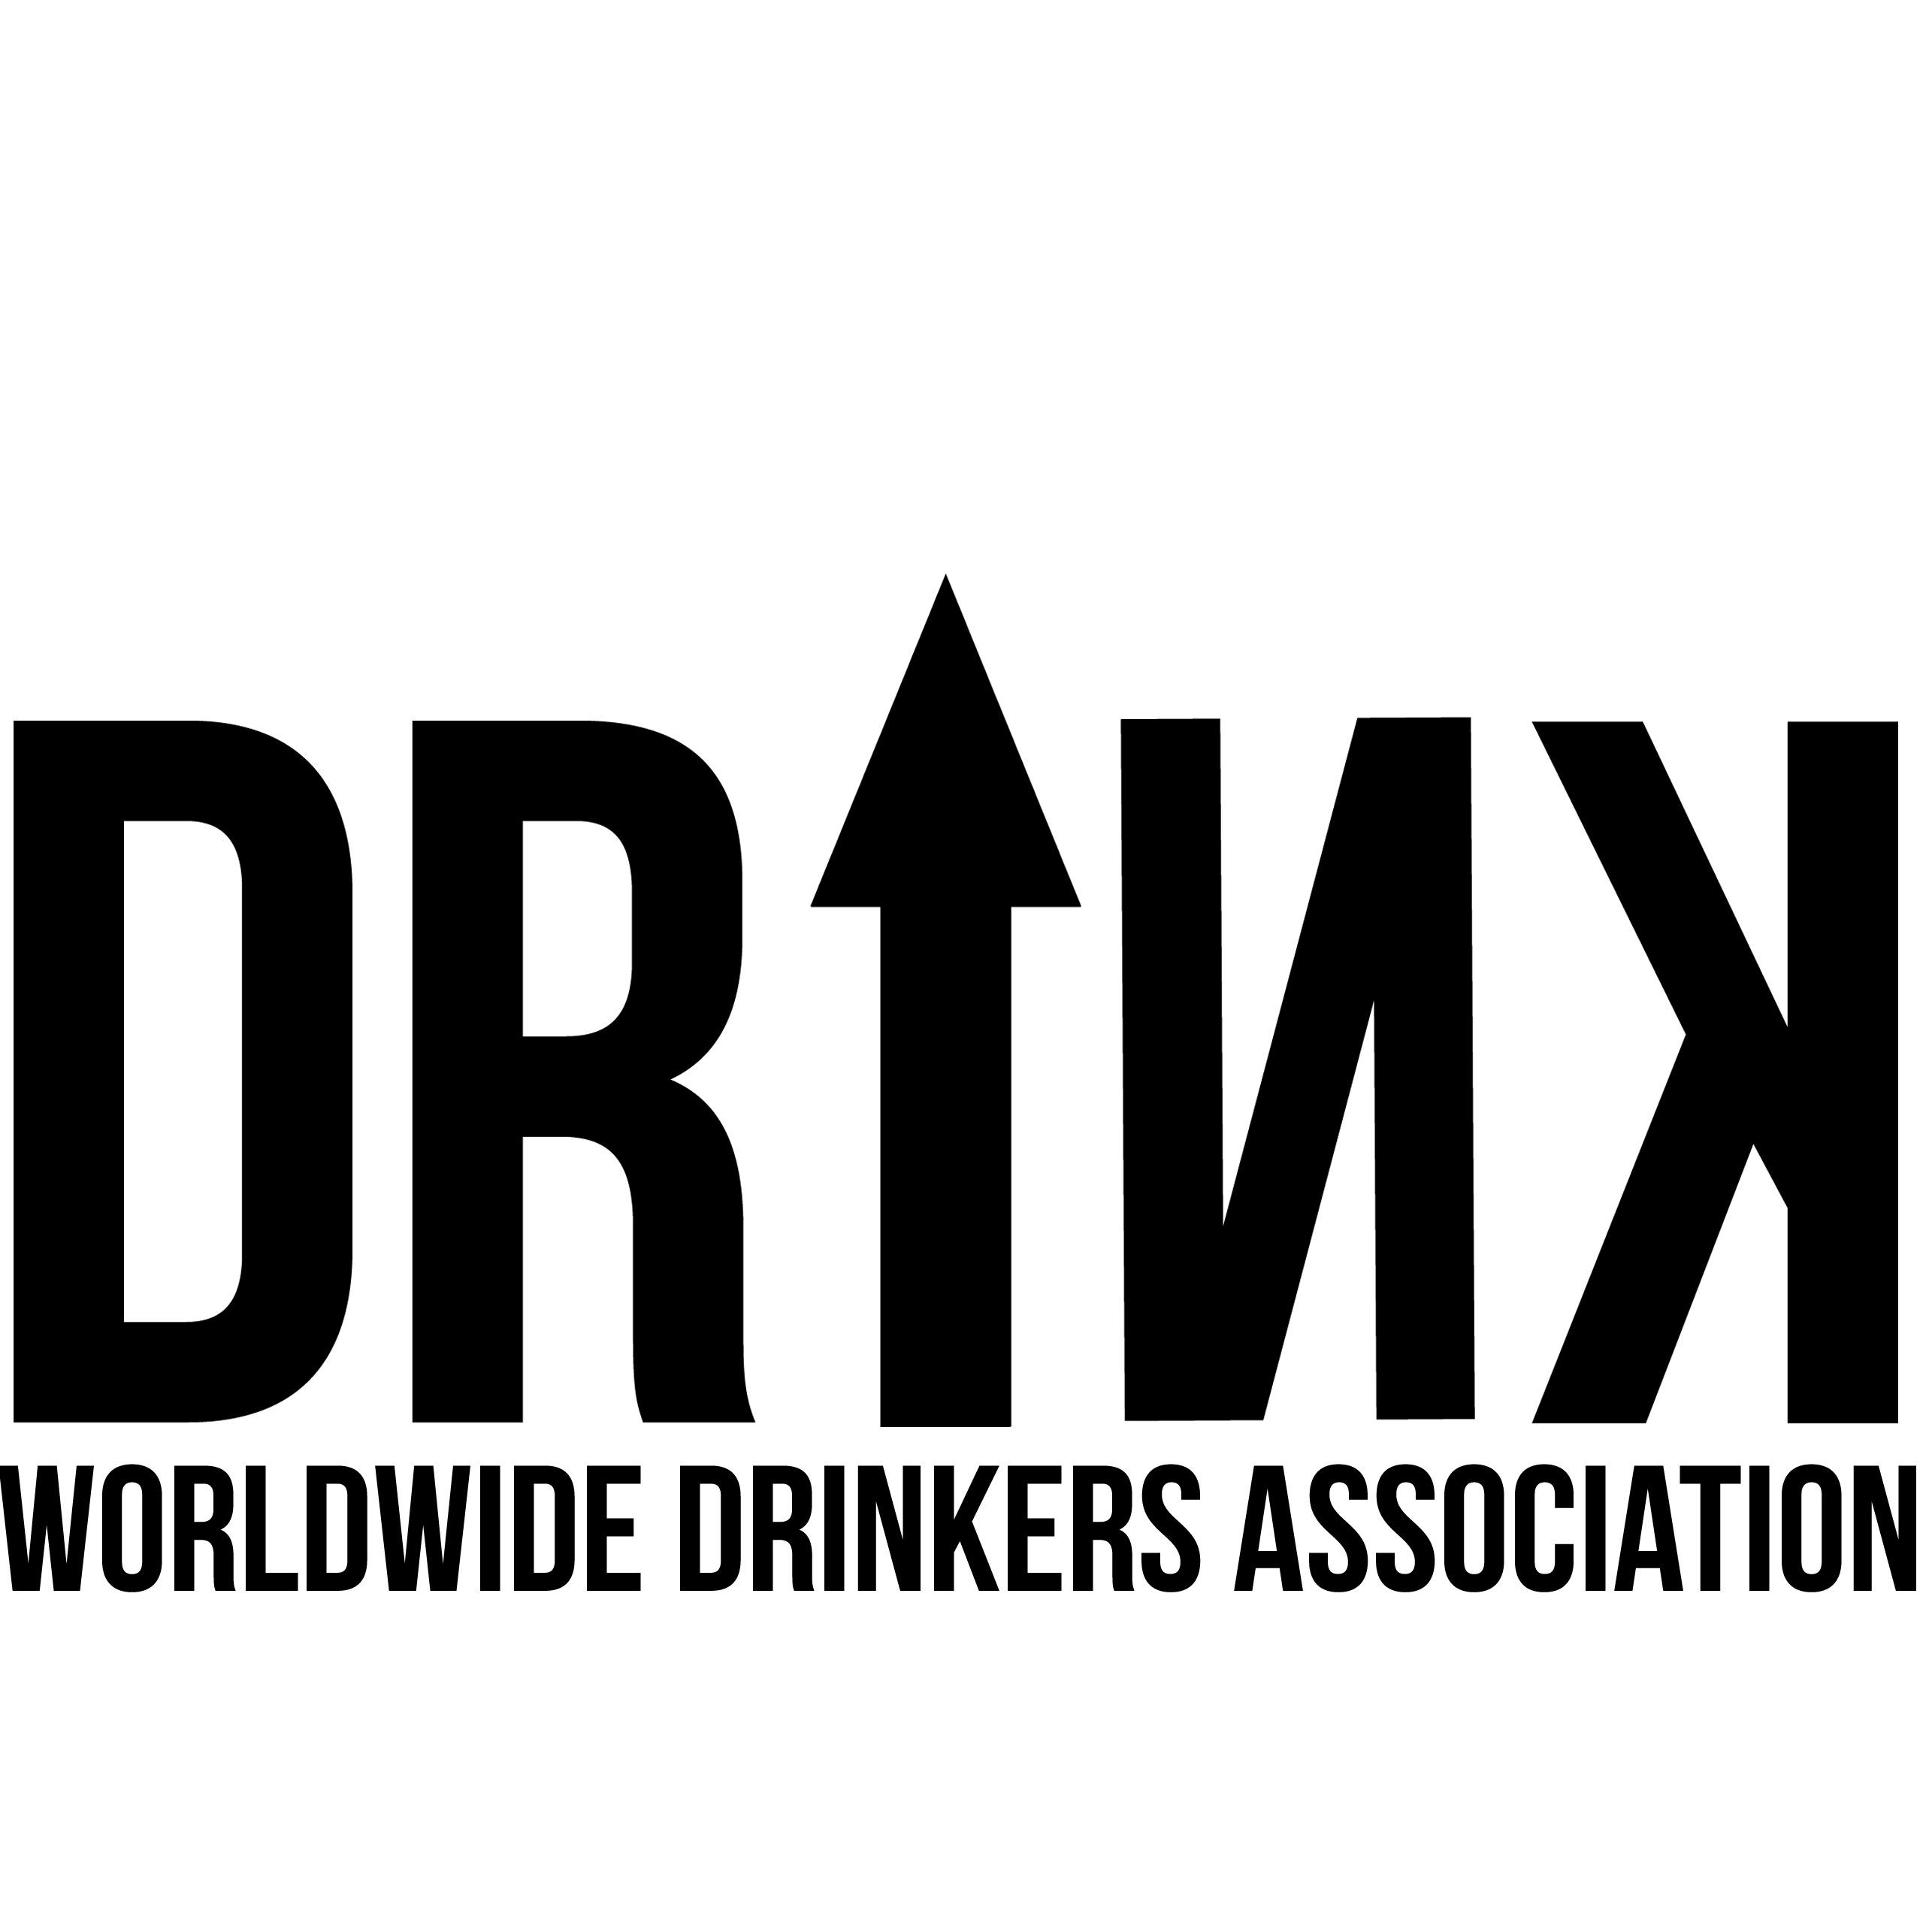 WorldWide Drinkers Association. Drink Up Life. Drink Up Love. Drink Up Happiness. What's in your cup?